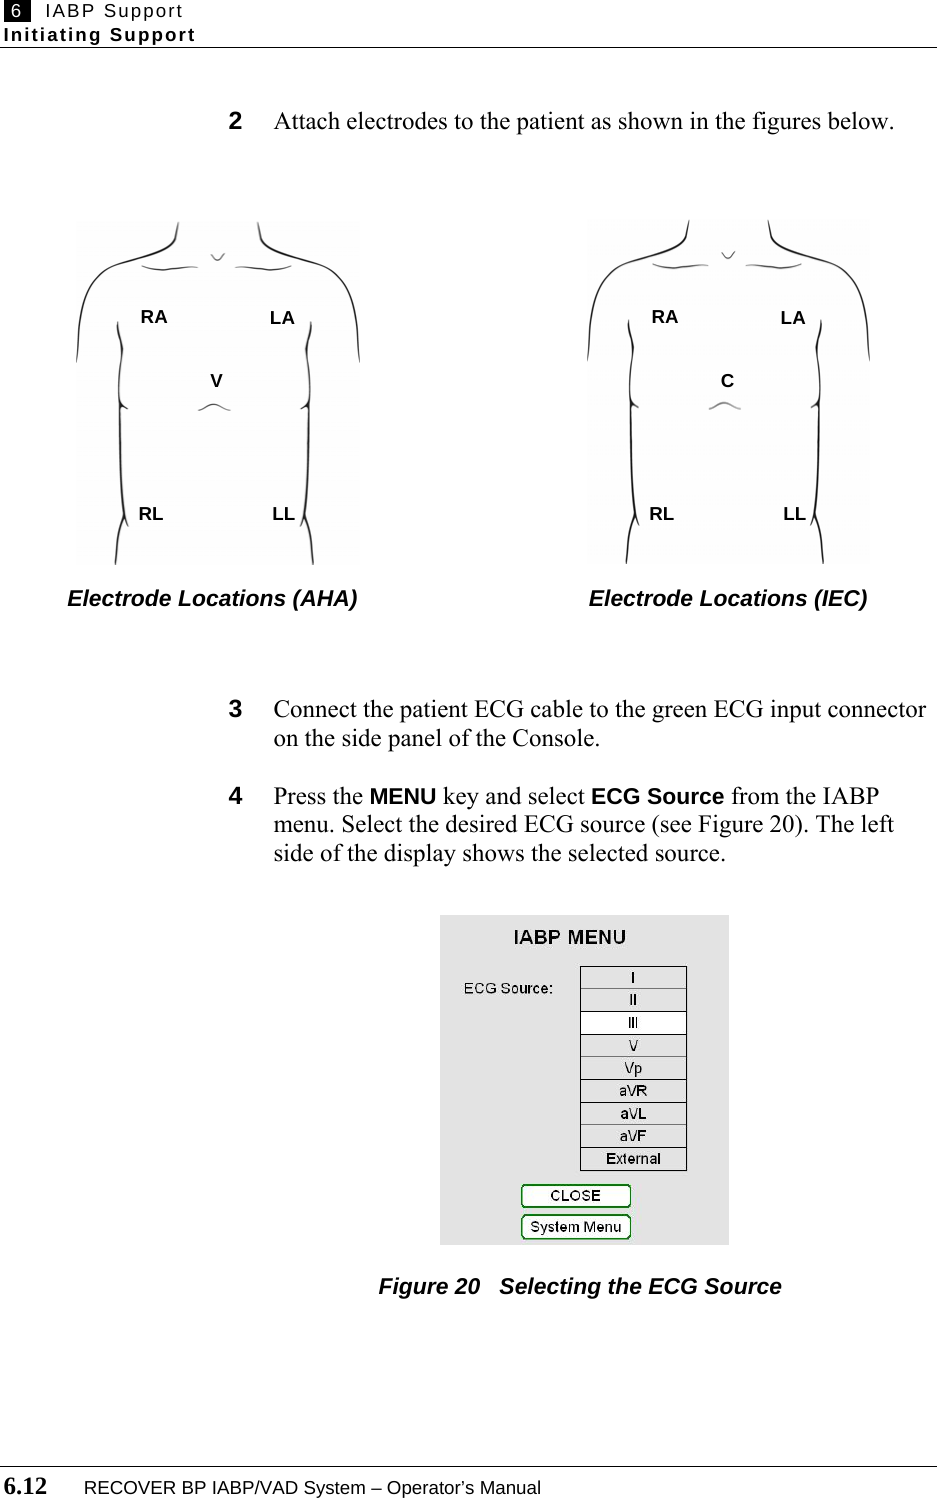  6   IABP Support Initiating Support  6.12       RECOVER BP IABP/VAD System – Operator’s Manual  2  Attach electrodes to the patient as shown in the figures below.                           Electrode Locations (AHA)                         Electrode Locations (IEC)    3  Connect the patient ECG cable to the green ECG input connector on the side panel of the Console.  4  Press the MENU key and select ECG Source from the IABP menu. Select the desired ECG source (see Figure 20). The left side of the display shows the selected source.               Figure 20   Selecting the ECG Source     RA   LA  V  RL   LL   RA   LA  C  RL   LL 